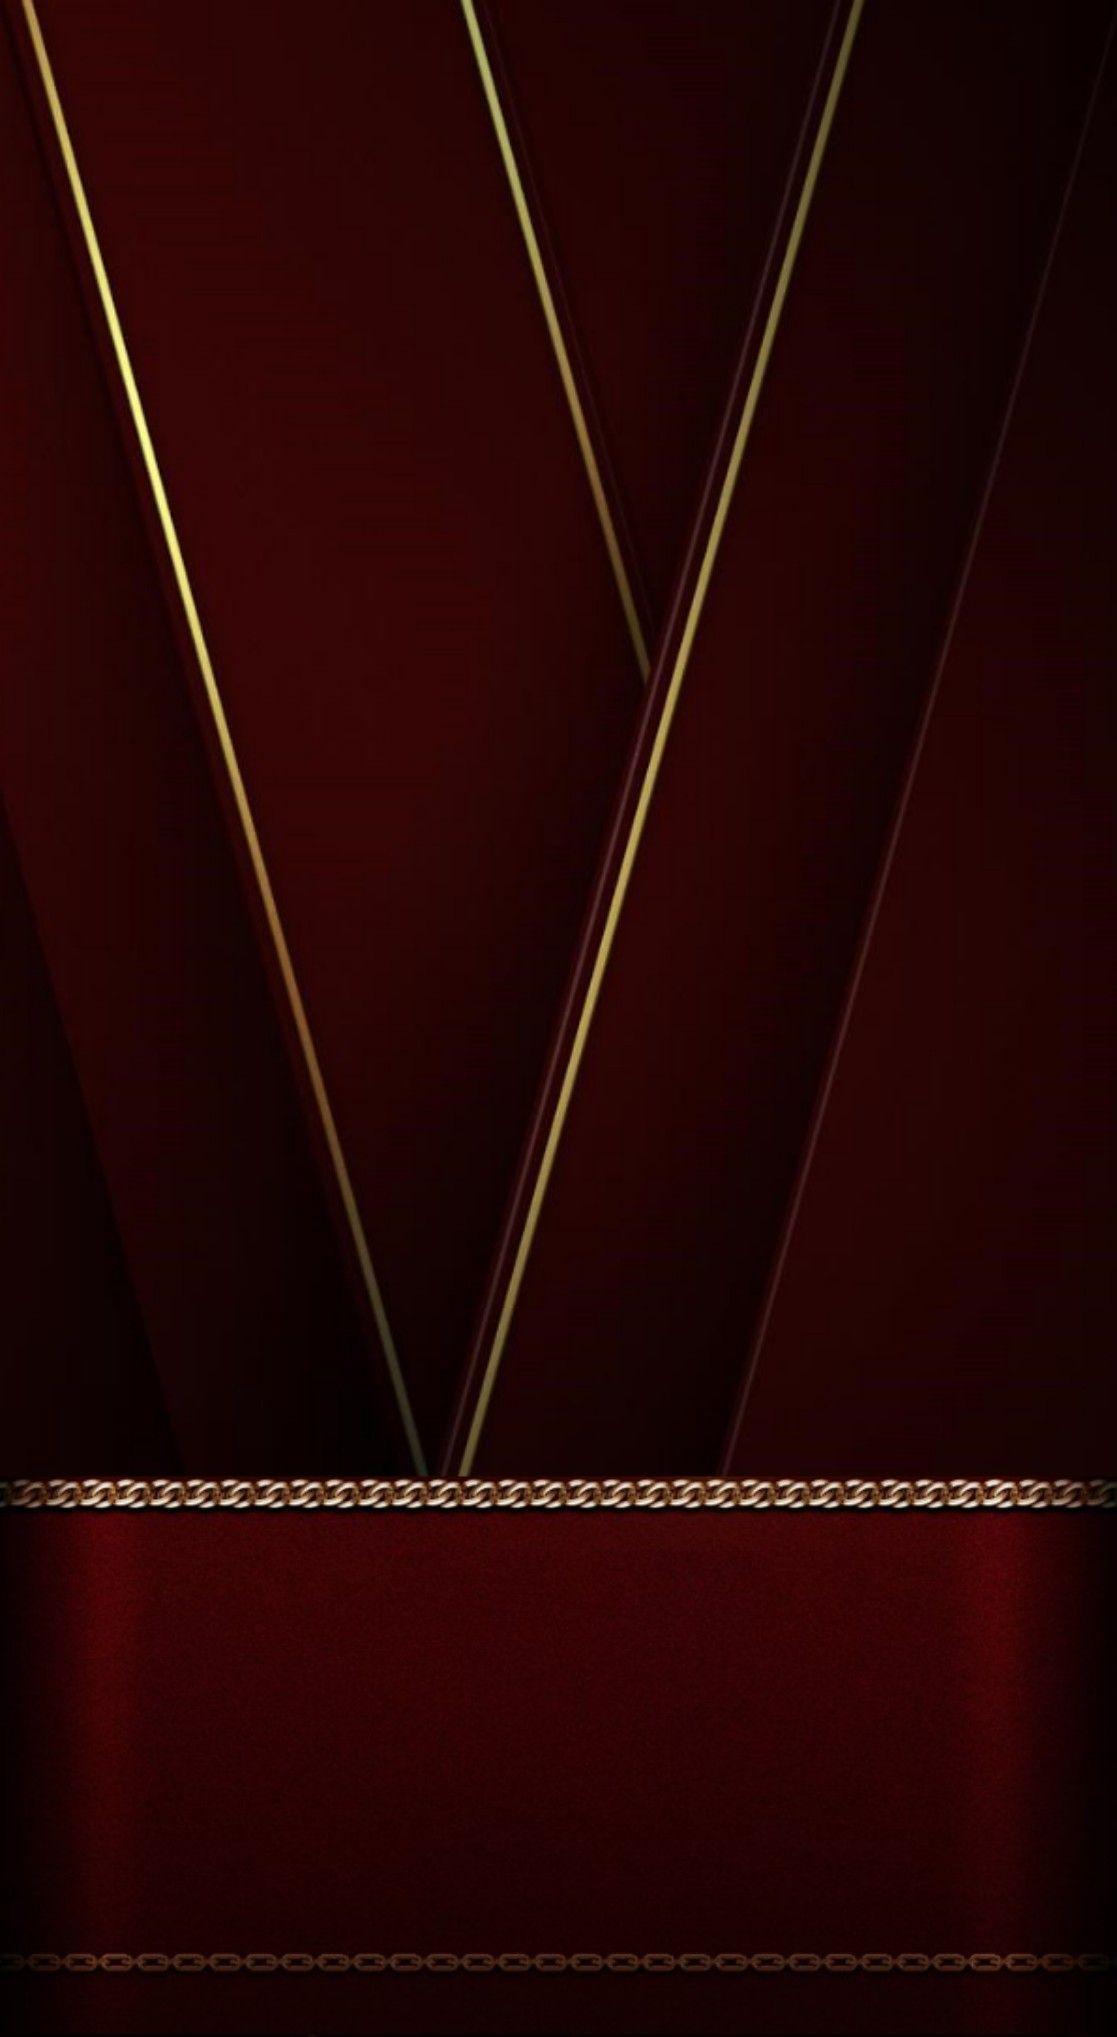 Burgundy with Gold Trim Wallpapers